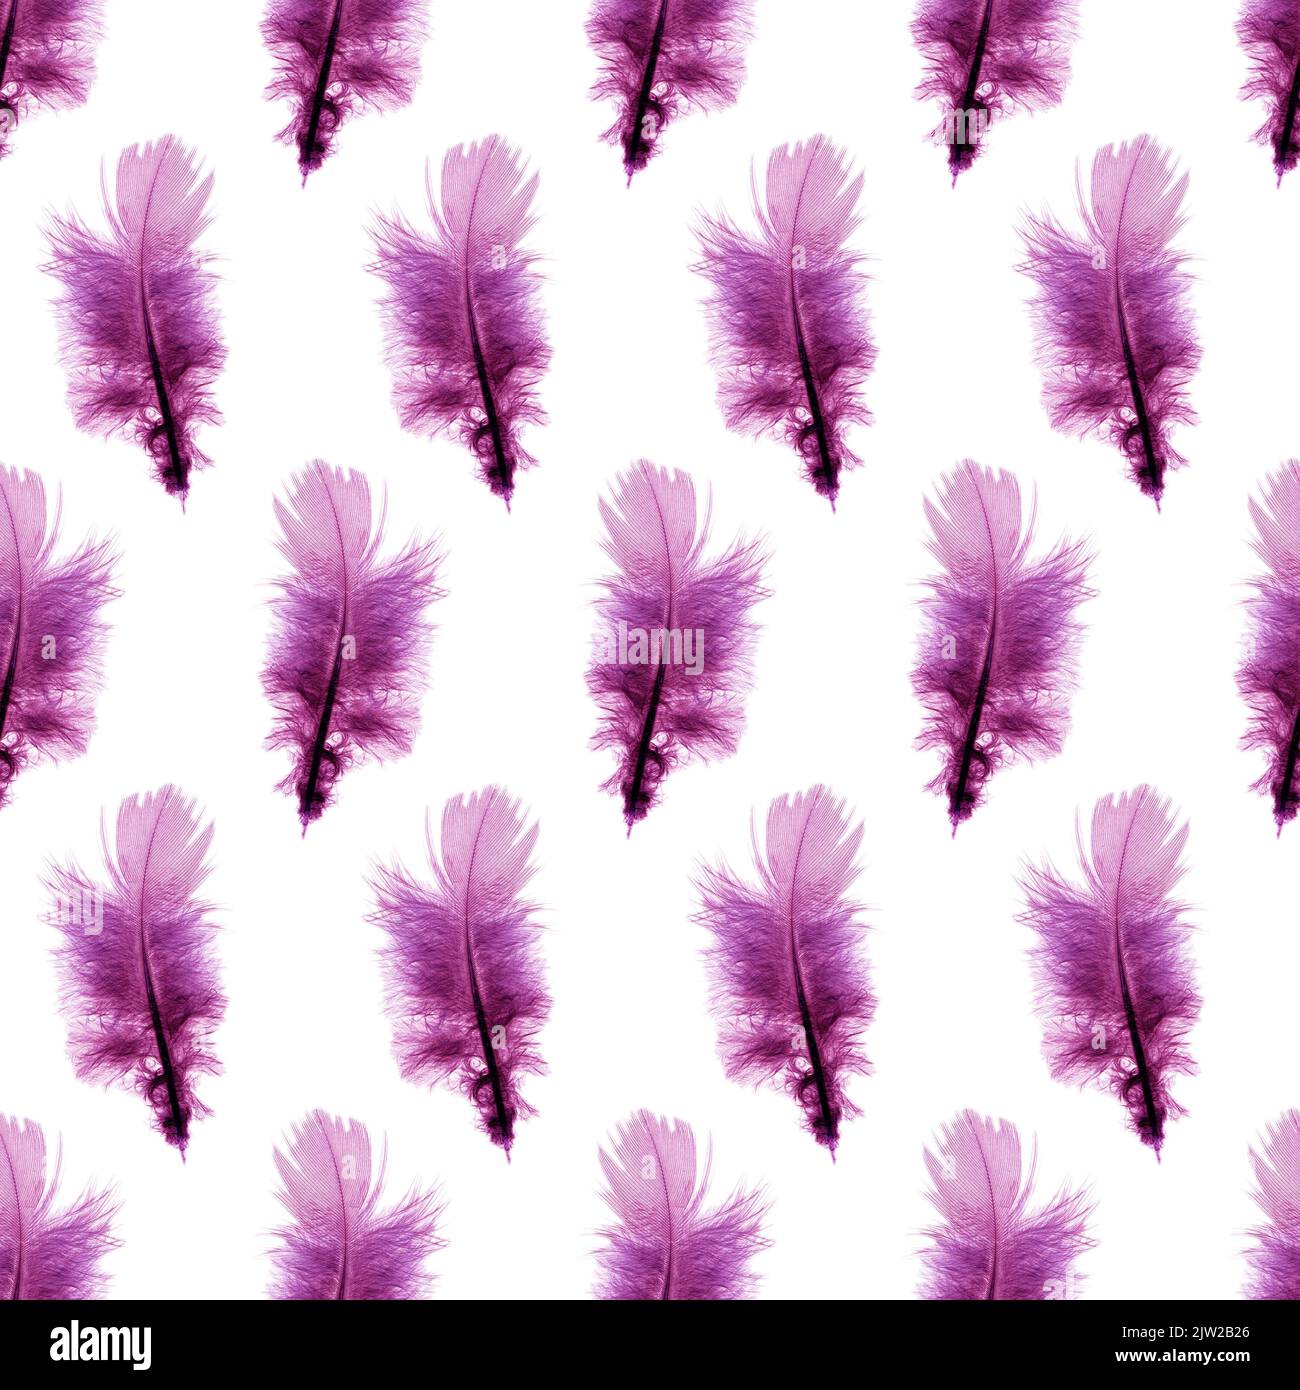 Purple Feathers: Over 28,854 Royalty-Free Licensable Stock Illustrations &  Drawings